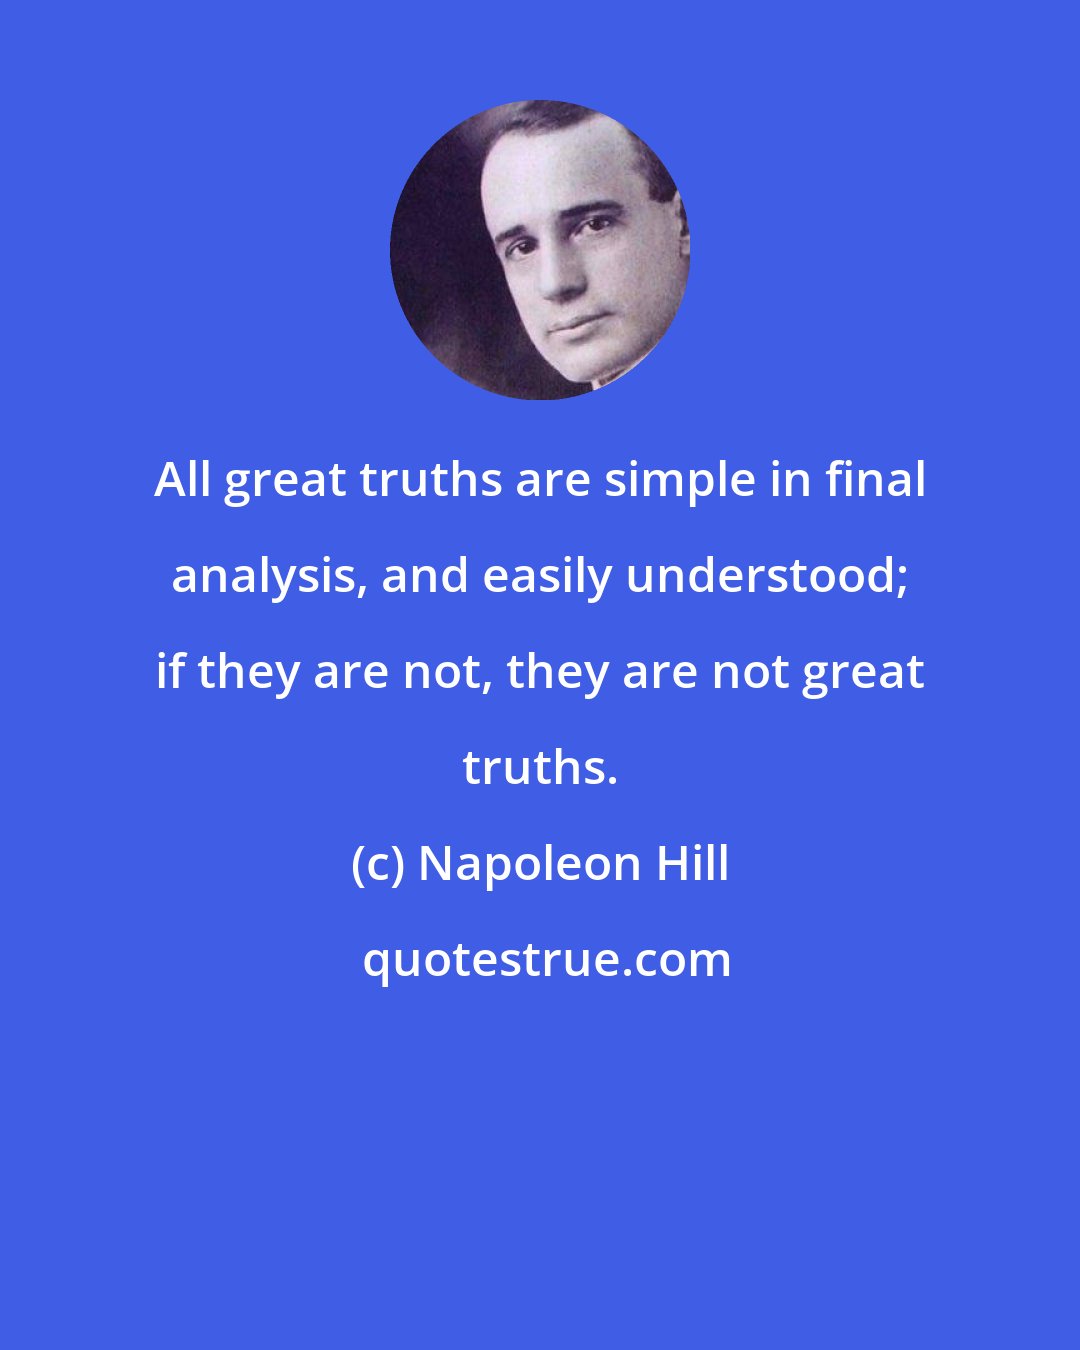 Napoleon Hill: All great truths are simple in final analysis, and easily understood; if they are not, they are not great truths.